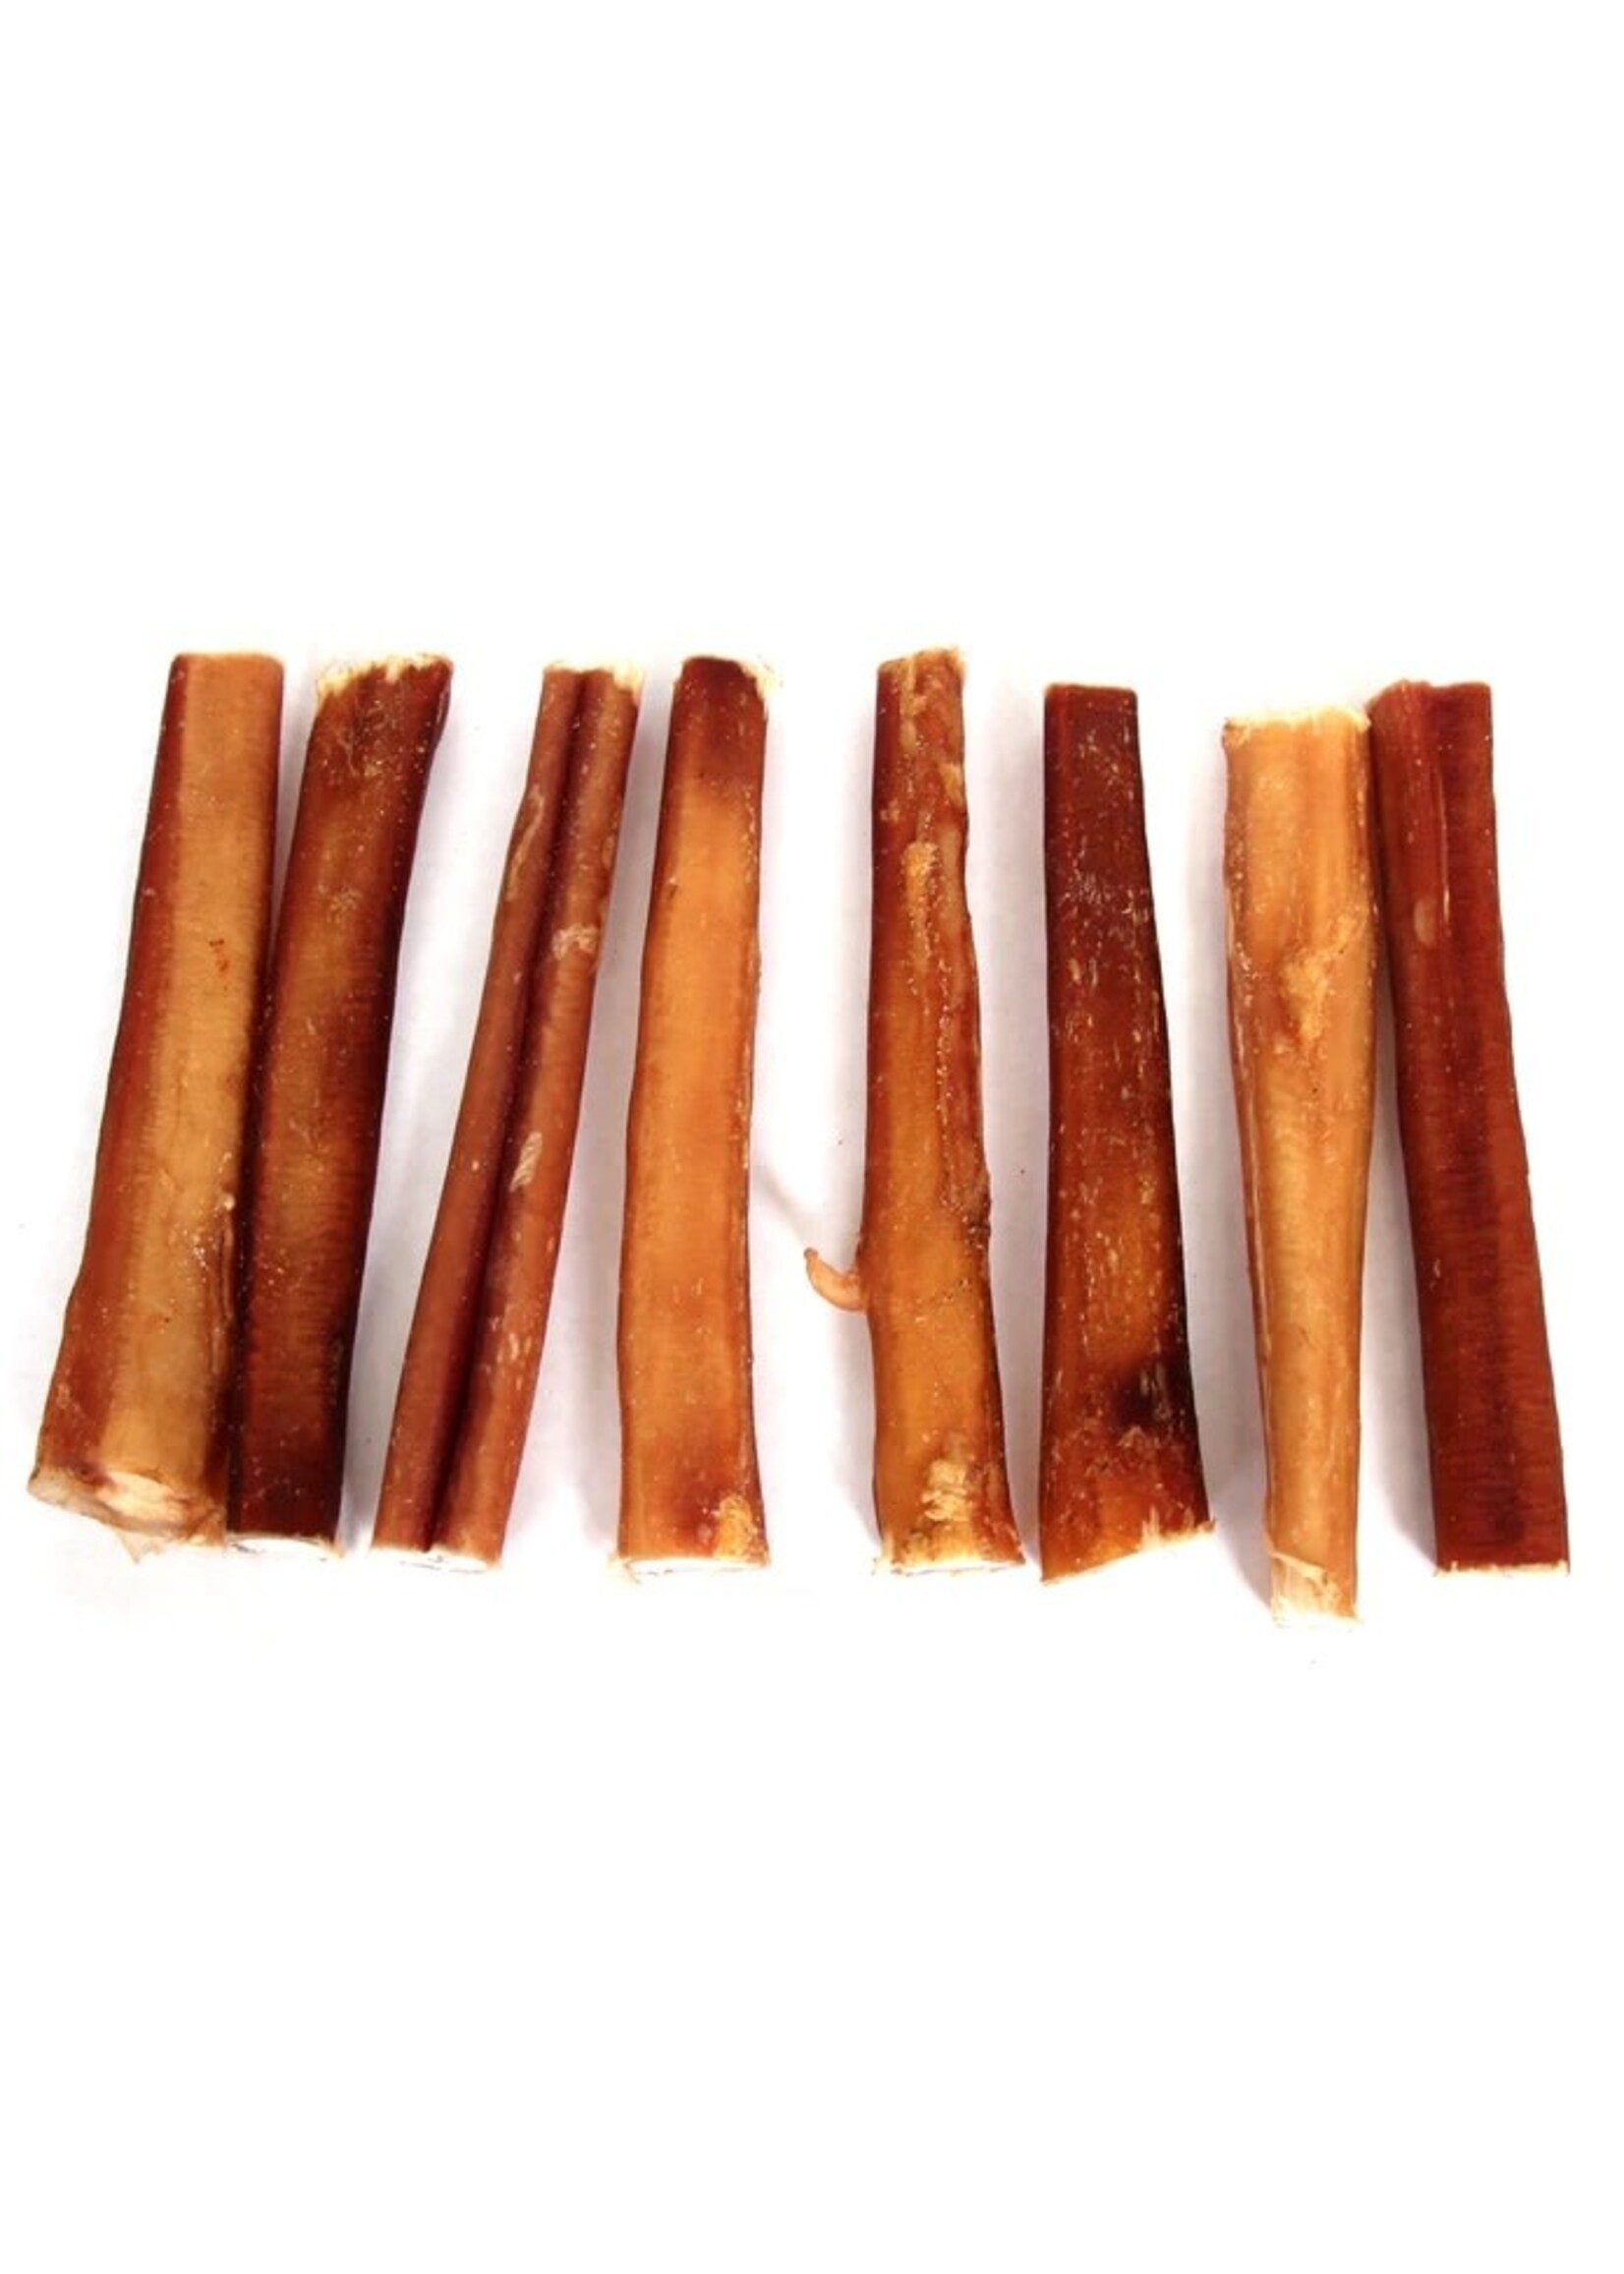 Tuesday's Natural Dog Company 6 inch Thick Bully Stick Dog Chew Treat